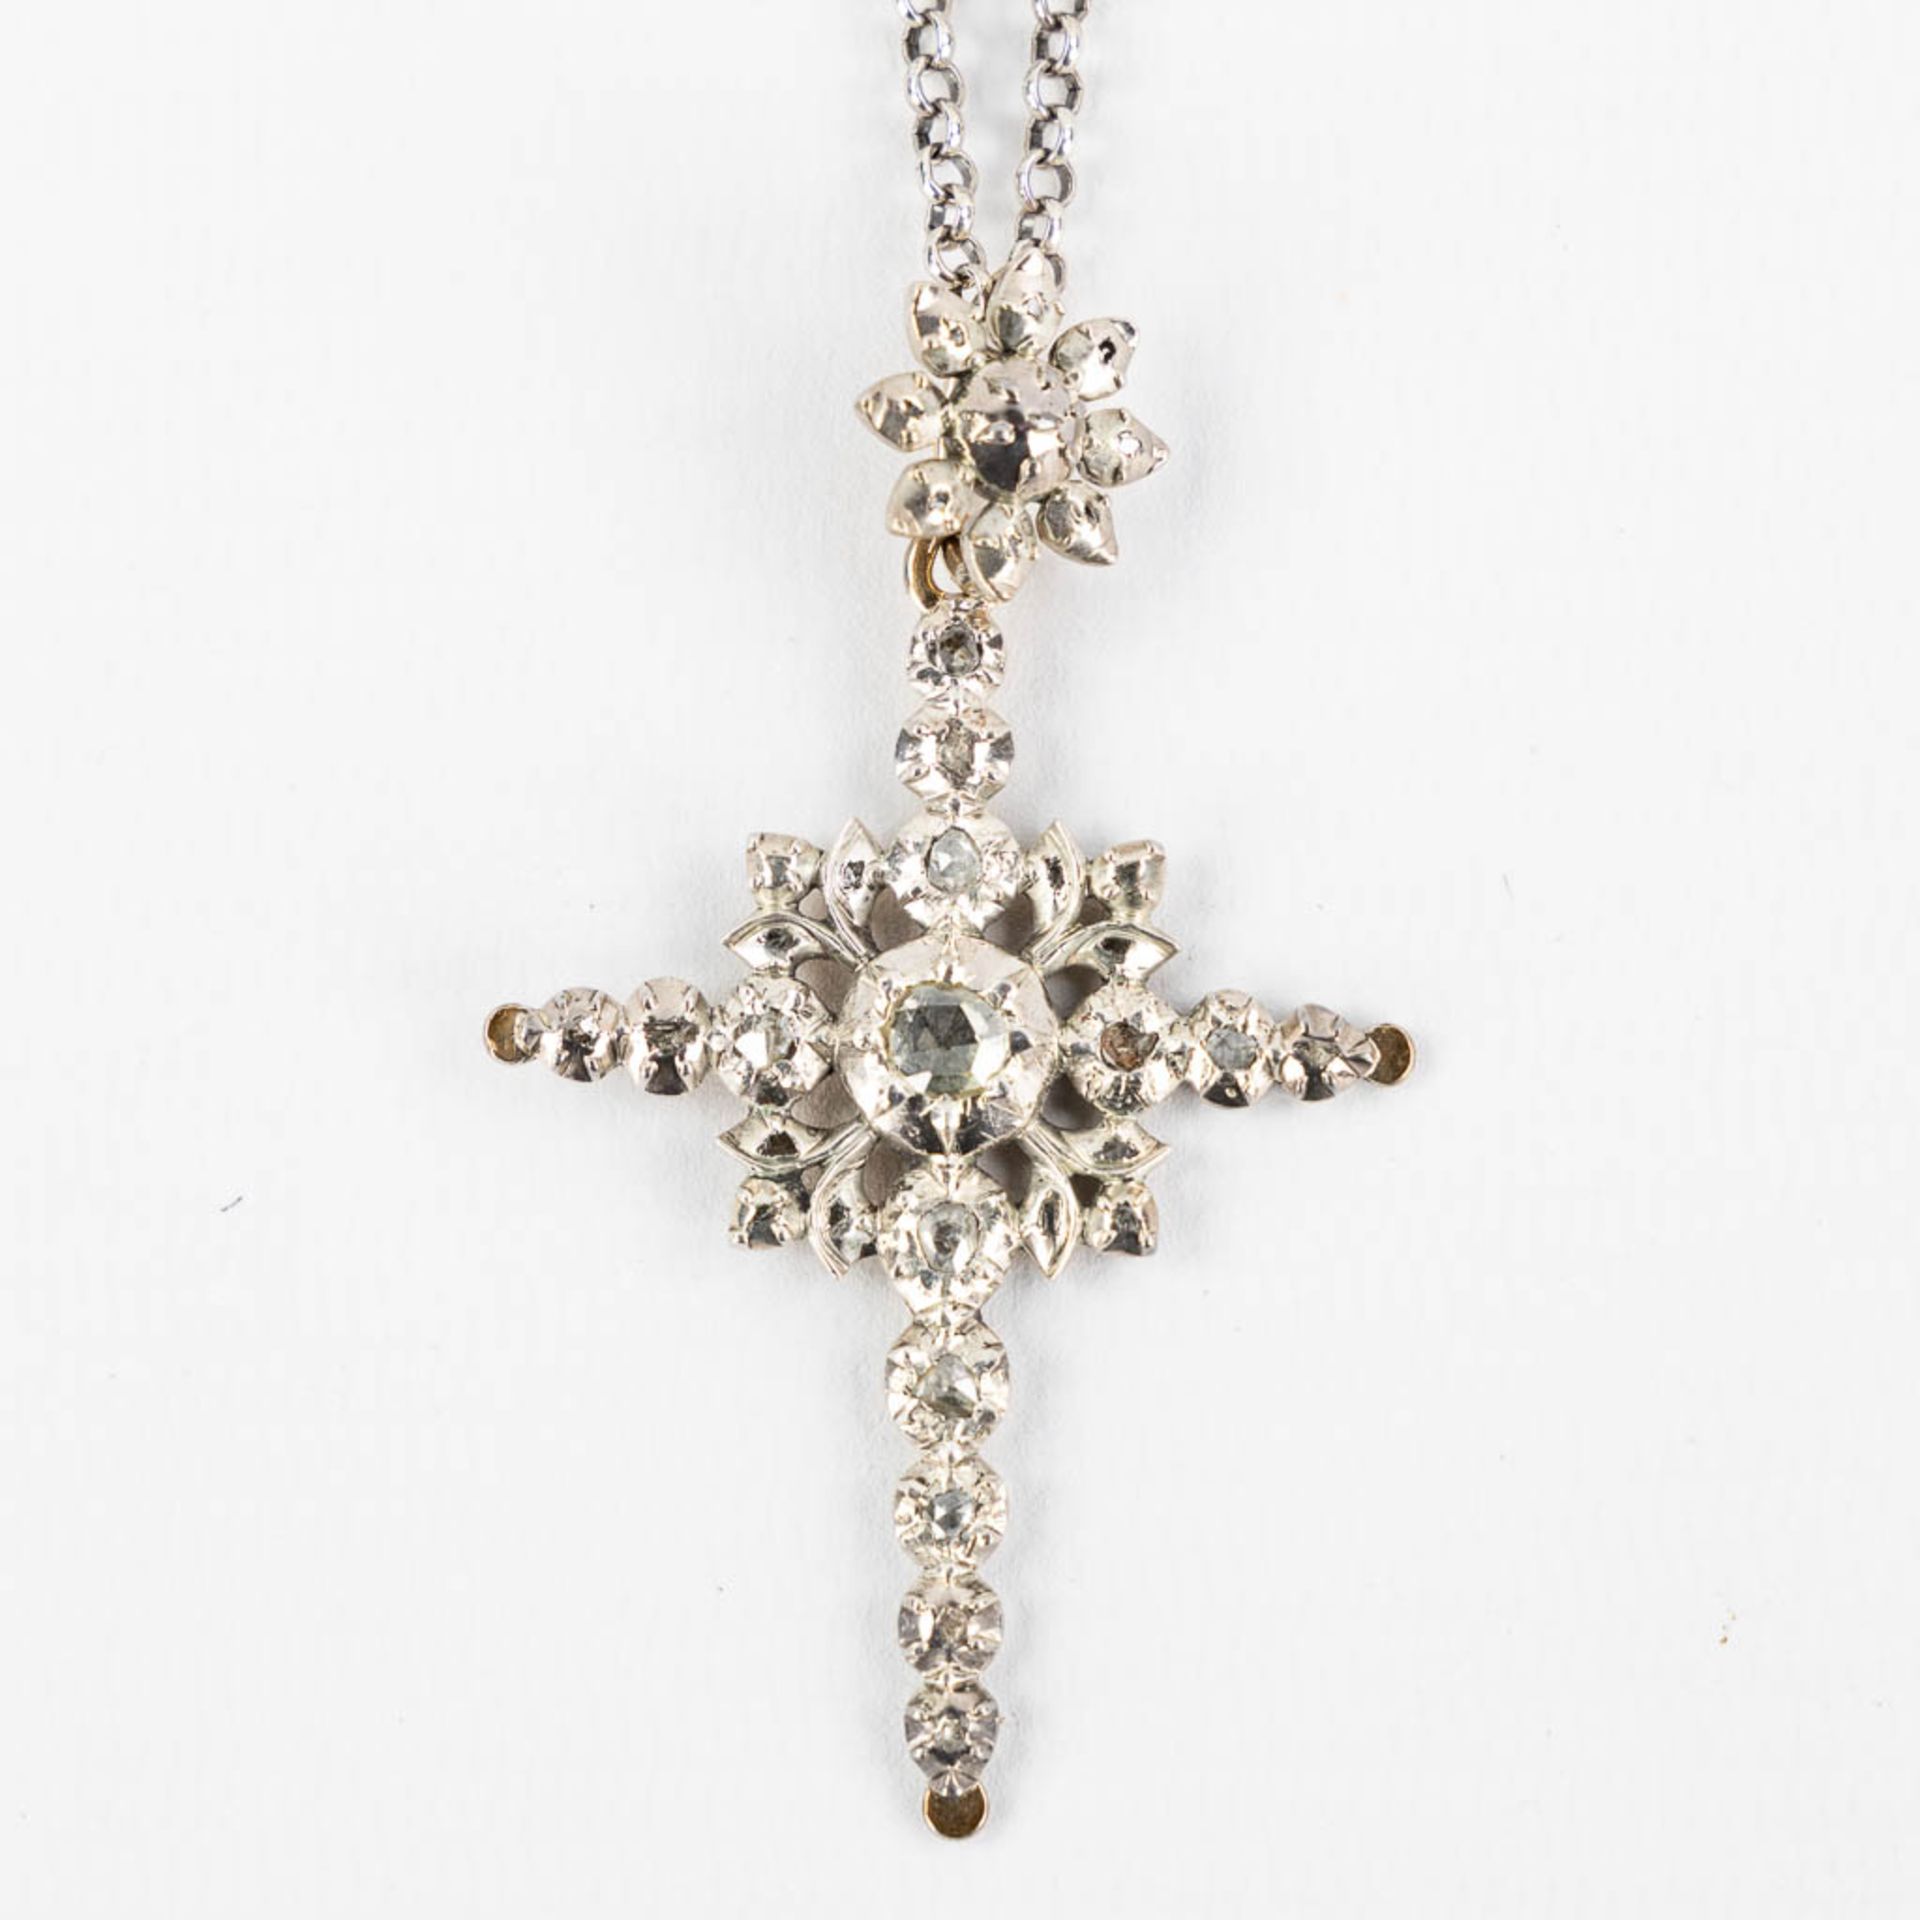 Three antique pendants in the shape of a crucifix, with old-cut diamonds. 18kt white and yelow gold. - Image 6 of 9